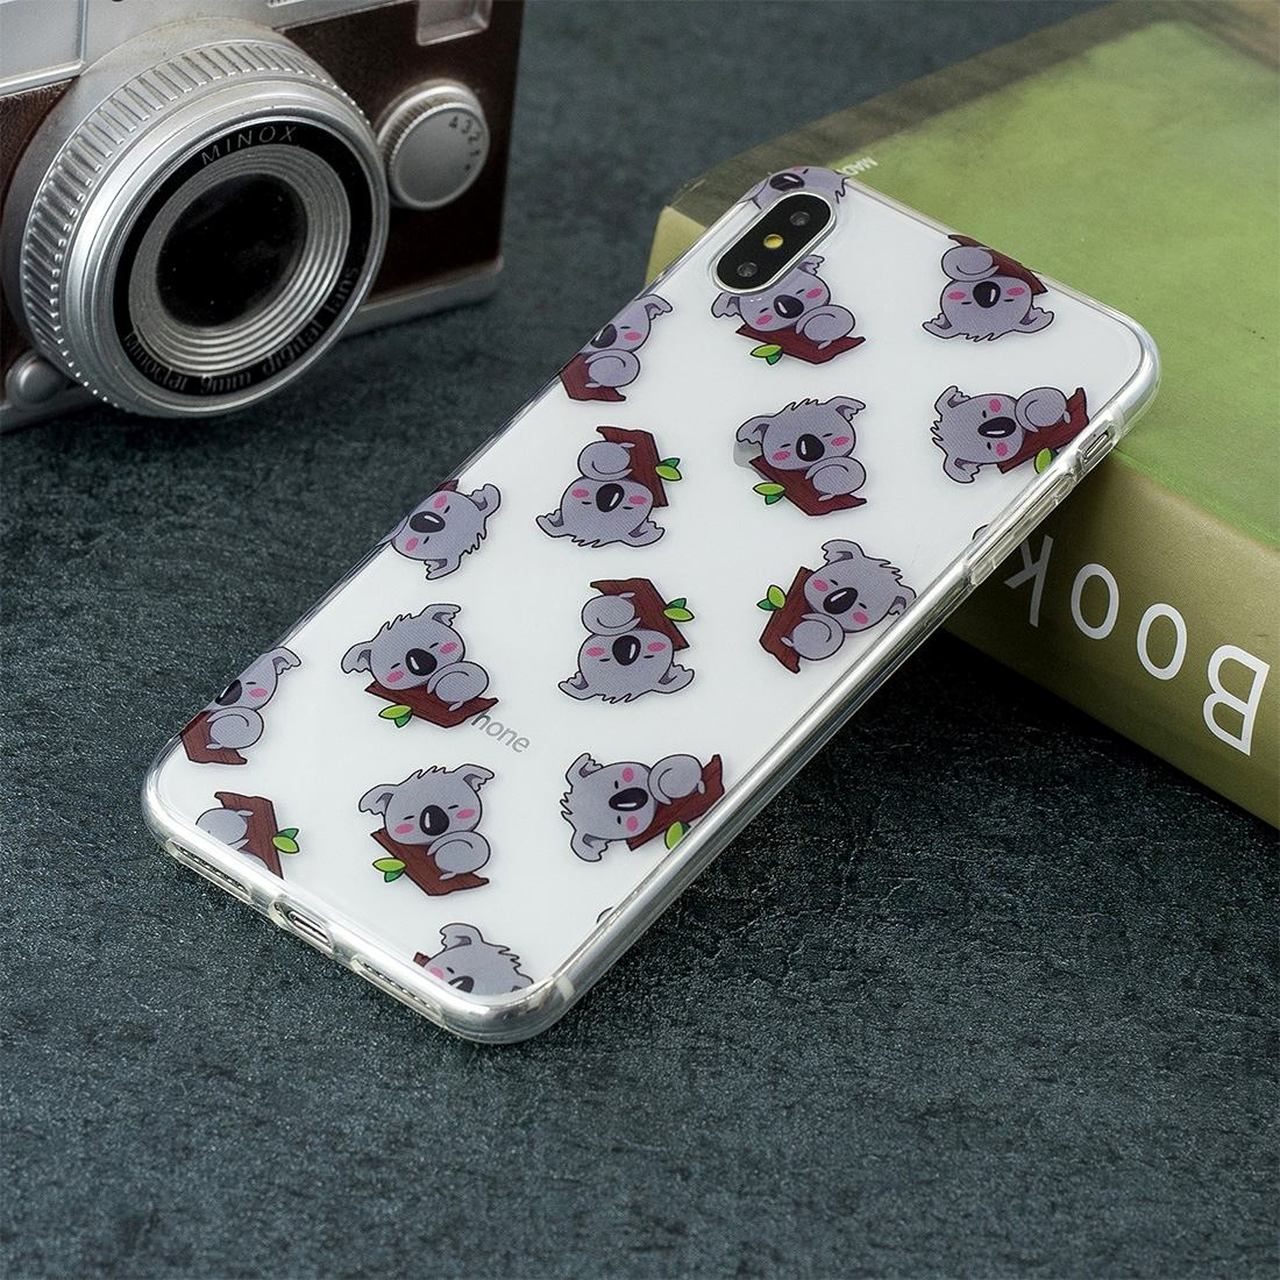 iPhone XS Max Case Embellished Koala Pattern Soft TPU Protective Back Case with Enhanced Grip, Scratch-Resistant